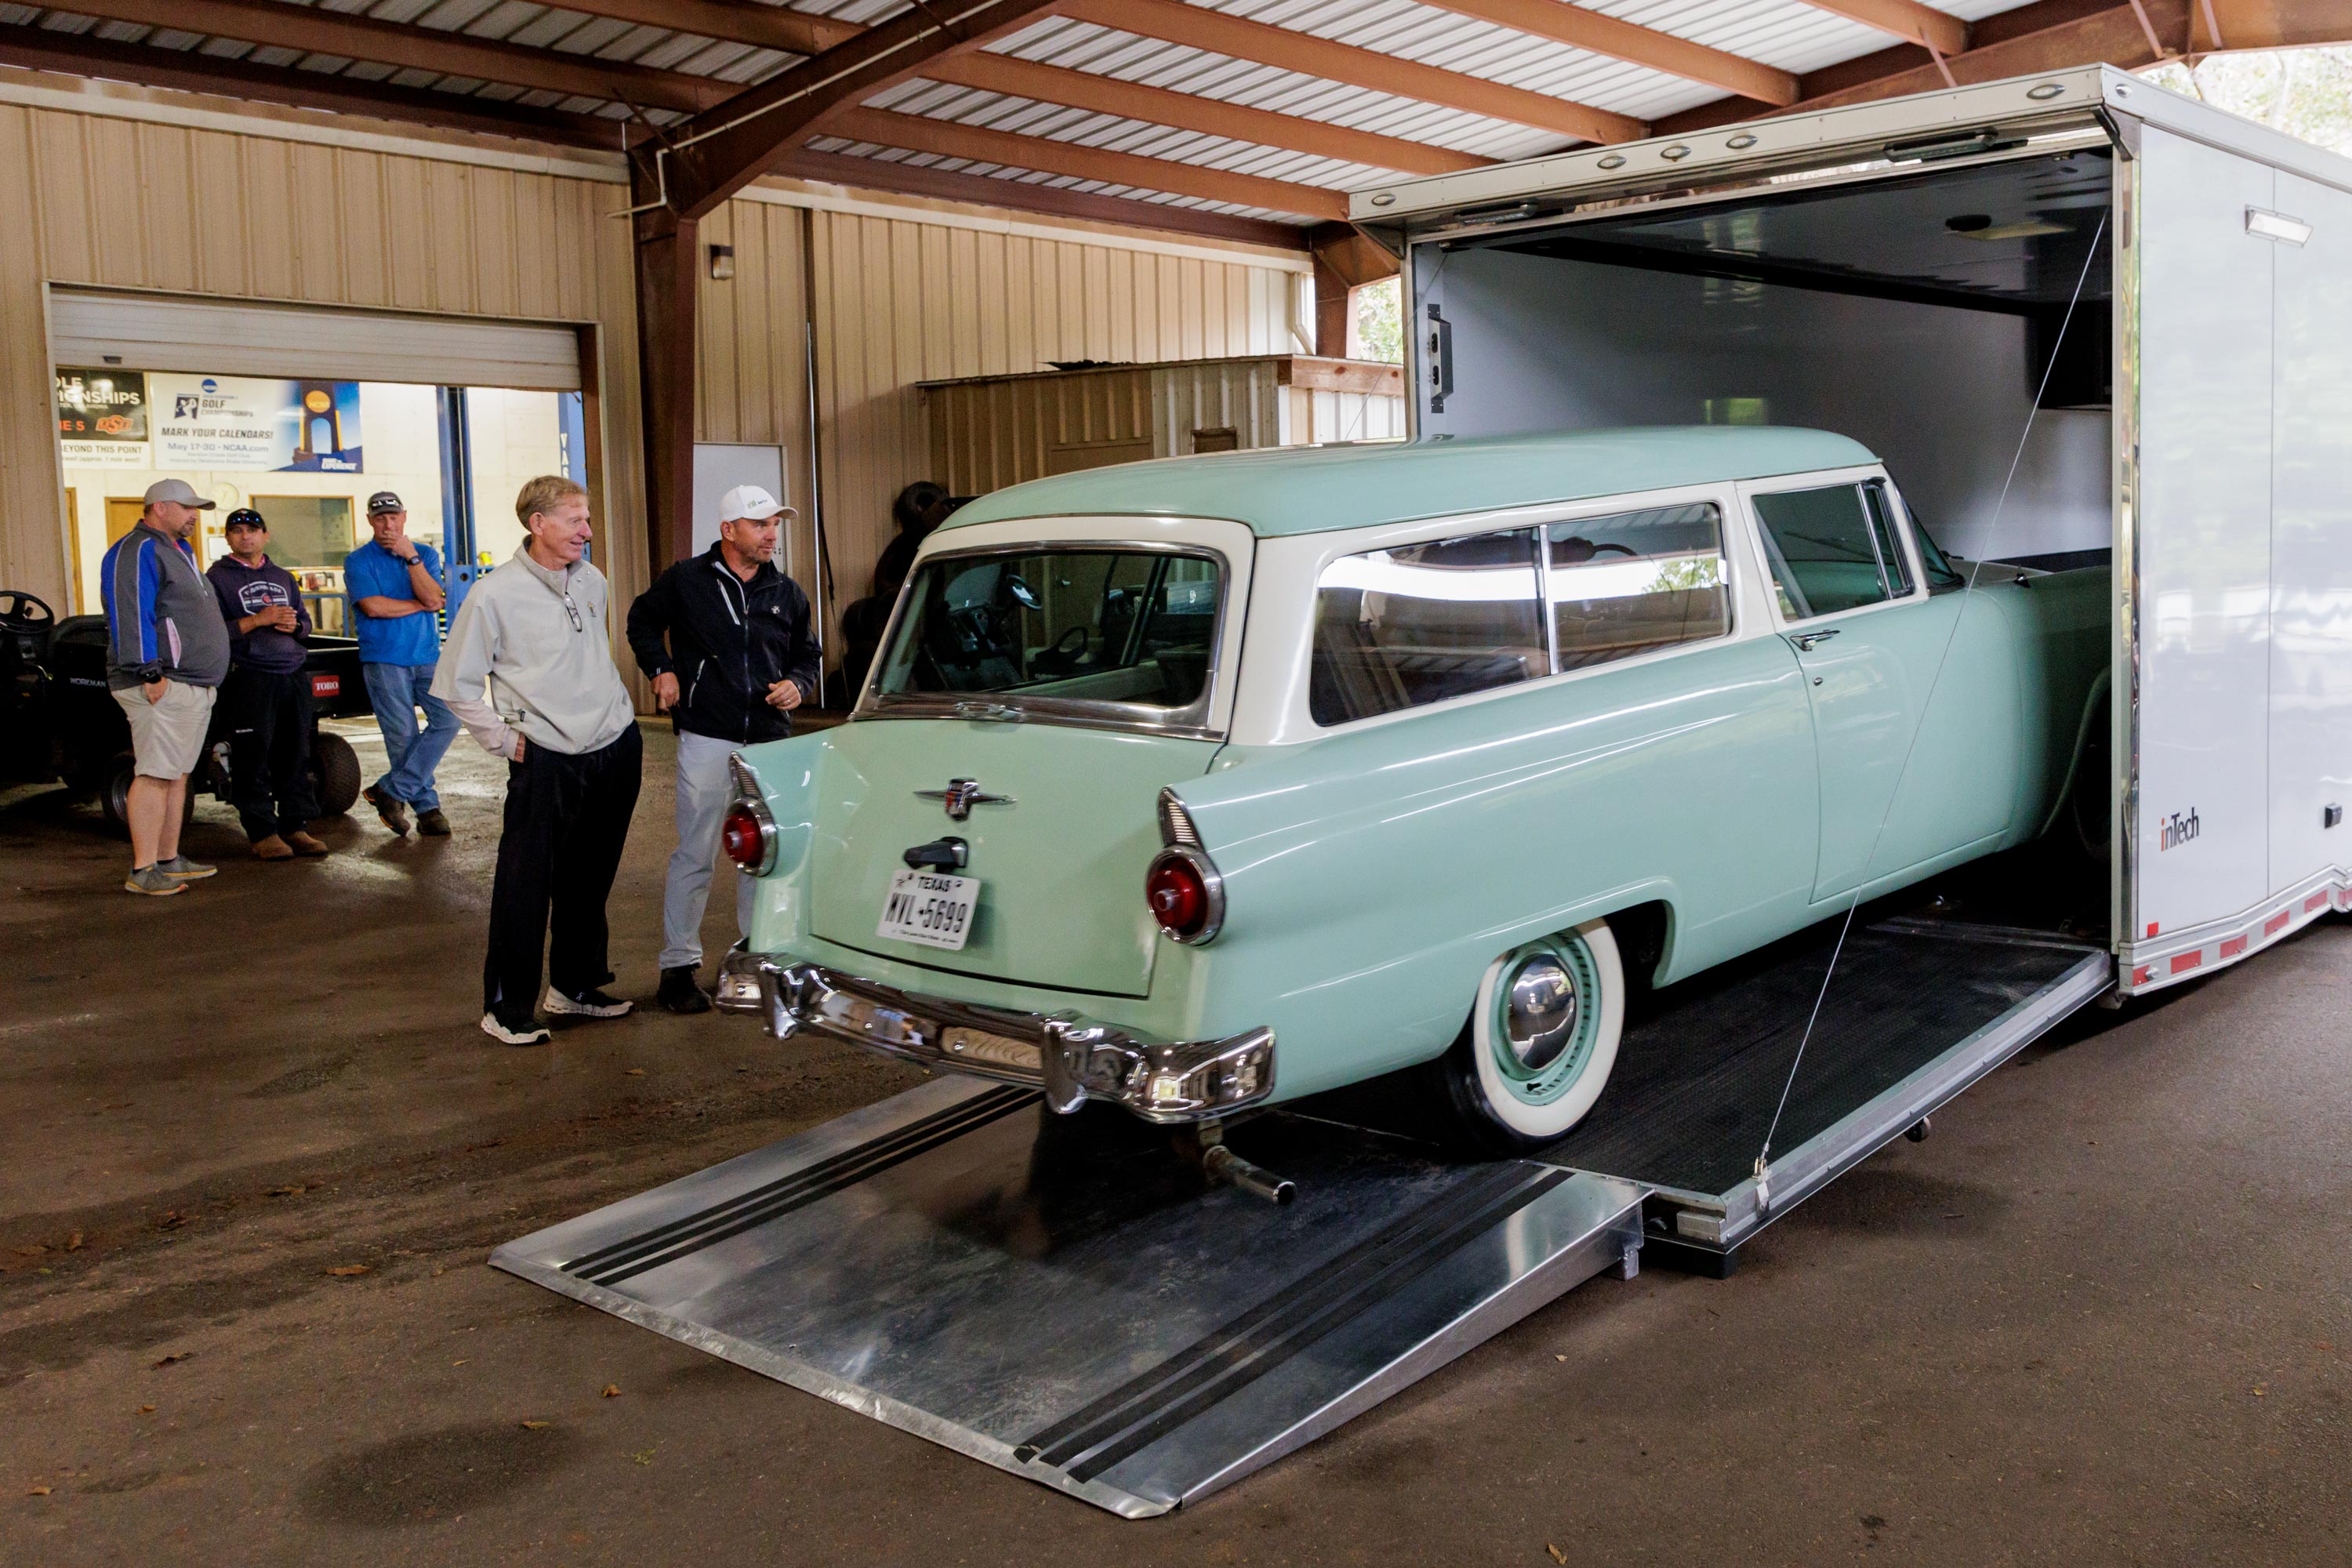 a replica of his 1955 Ford station wagon that served as his mobile office when he started his business. 